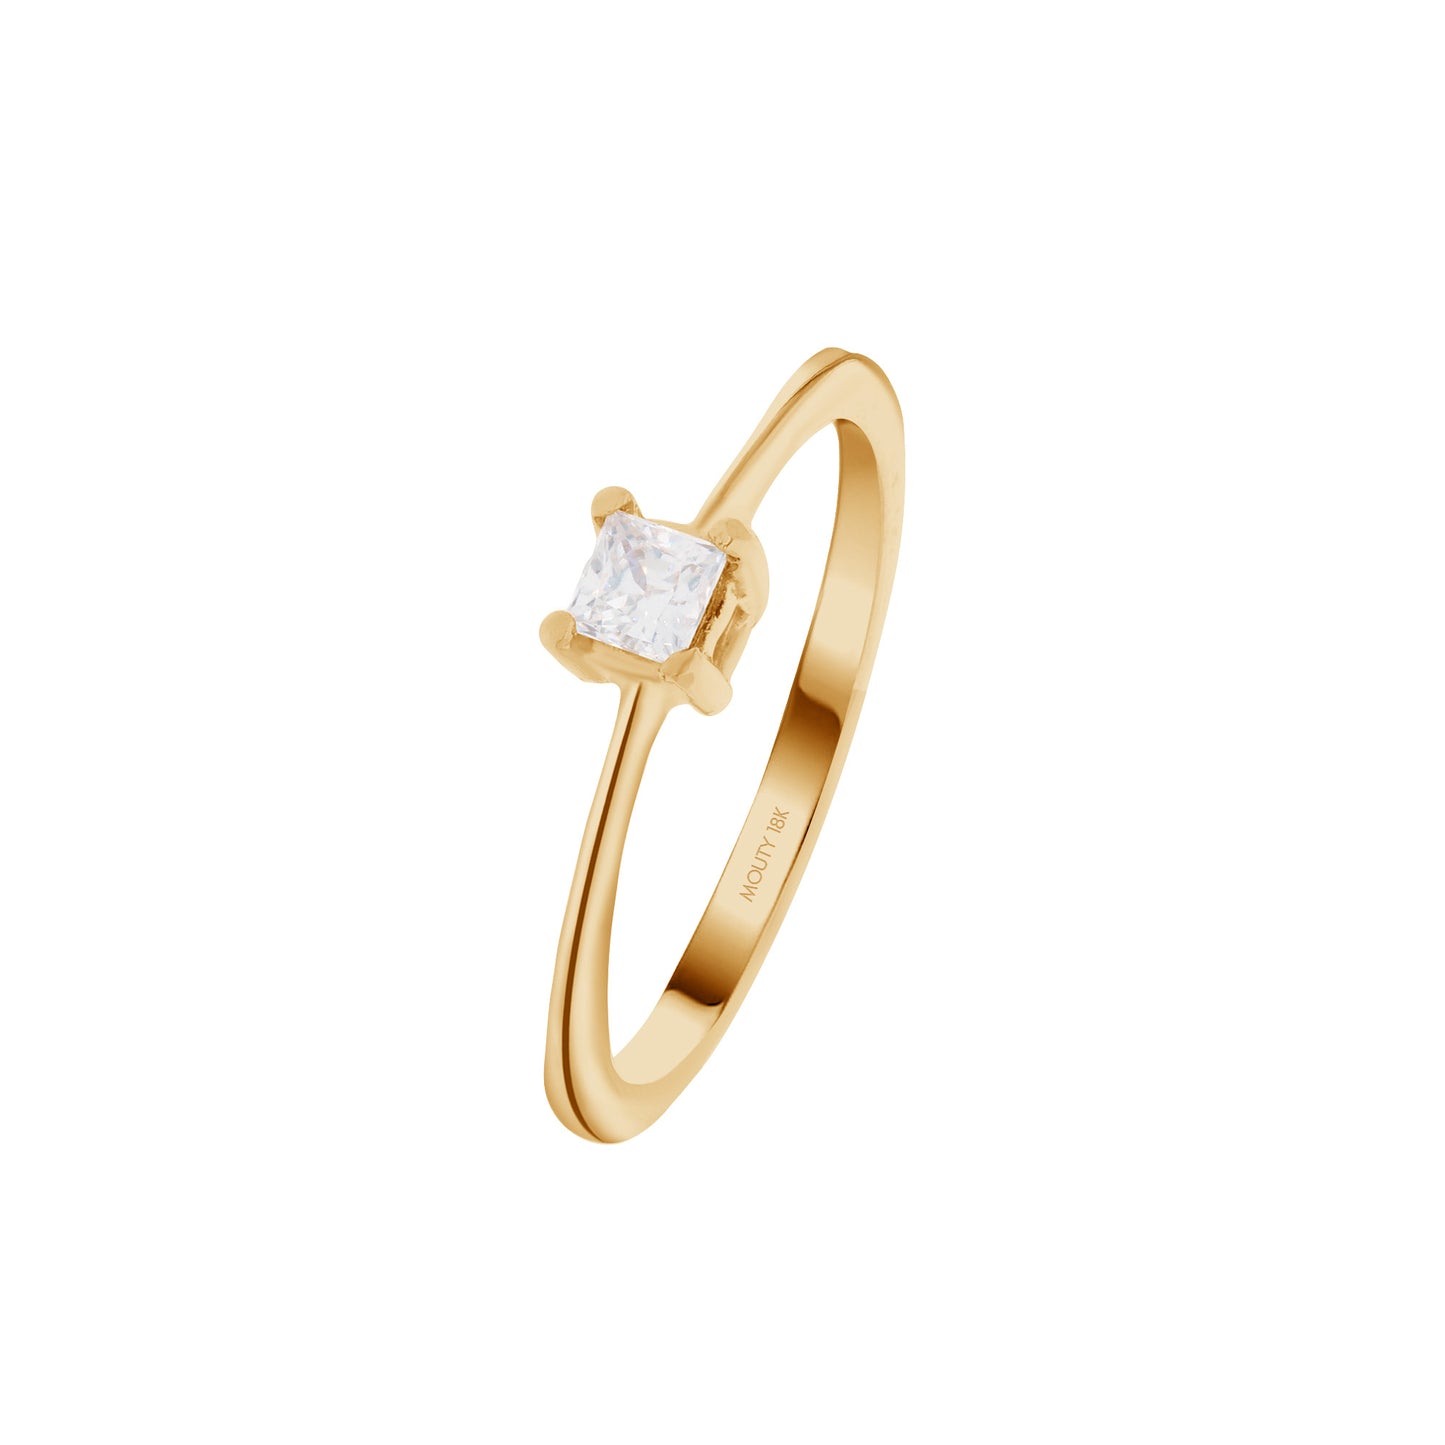 Darian ring in 18k yellow gold with zircons